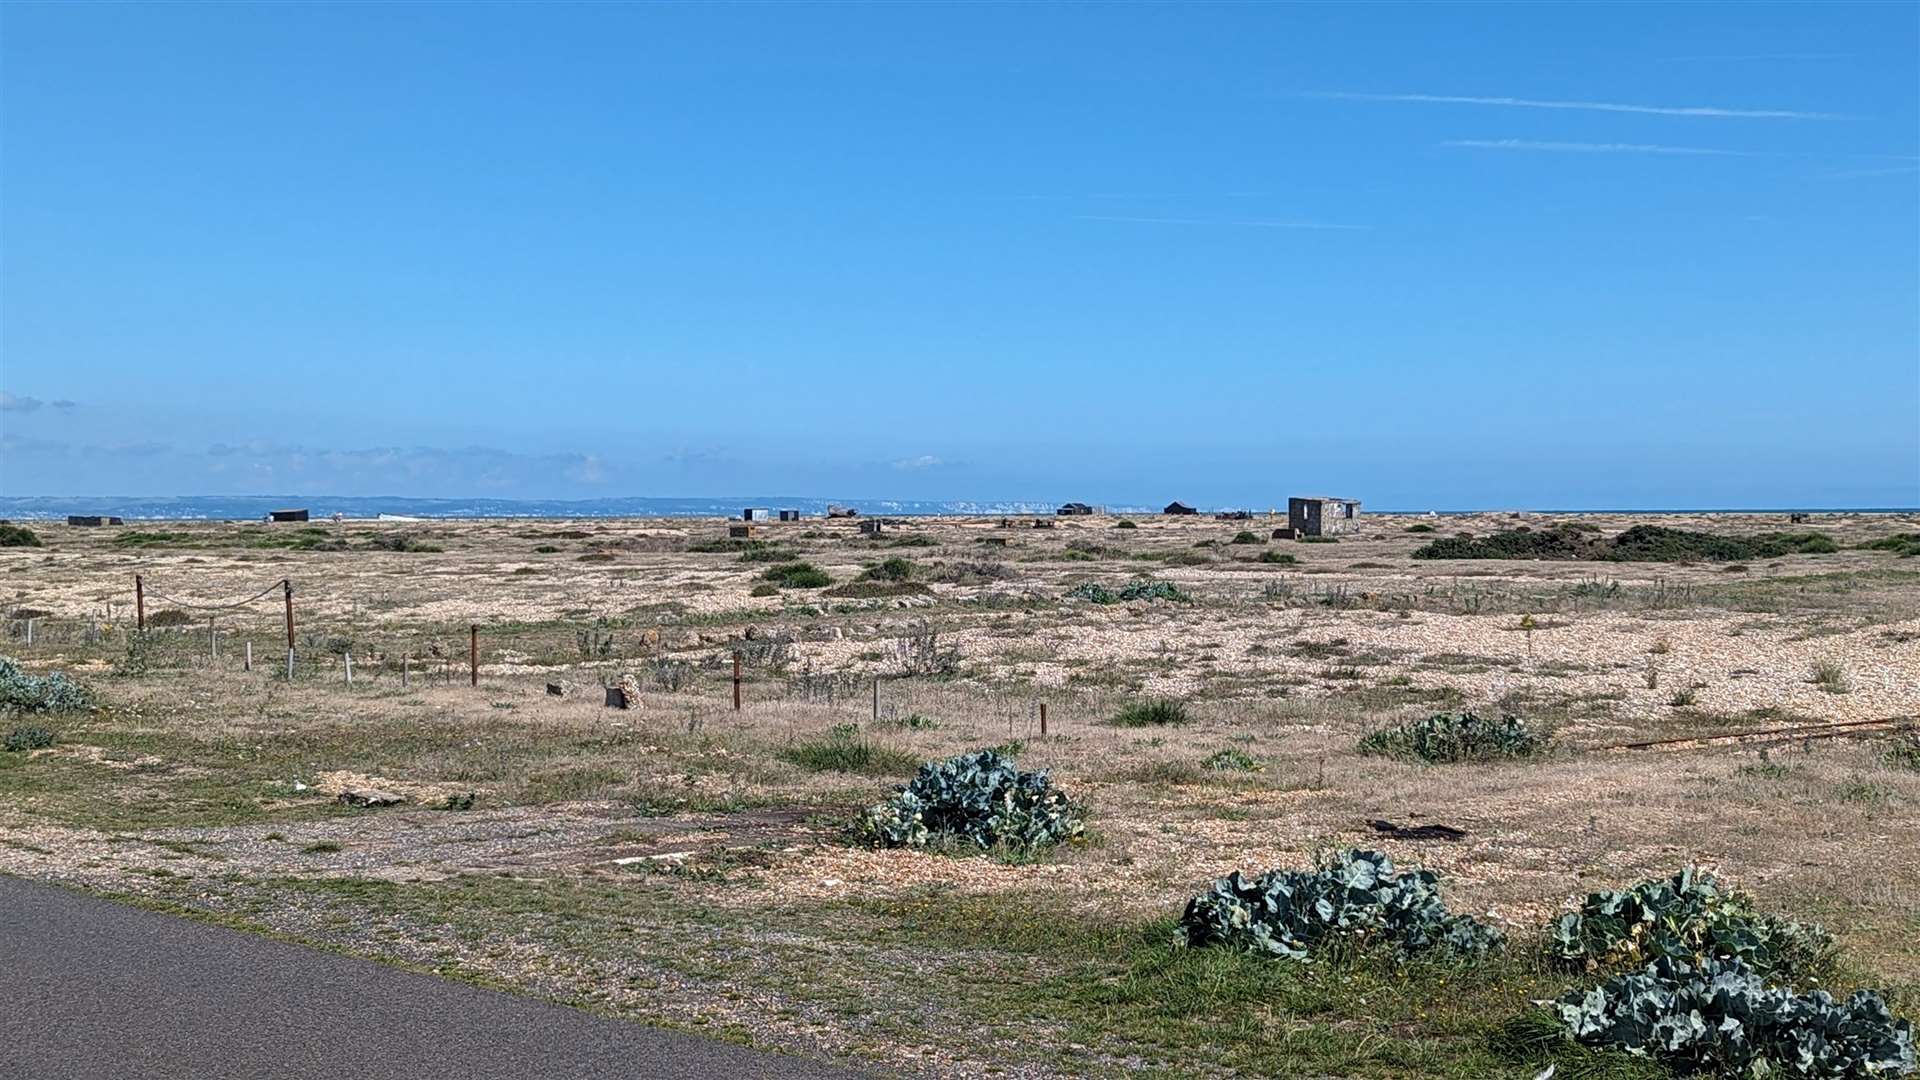 The Met Office has debunked claims this is the country’s only desert